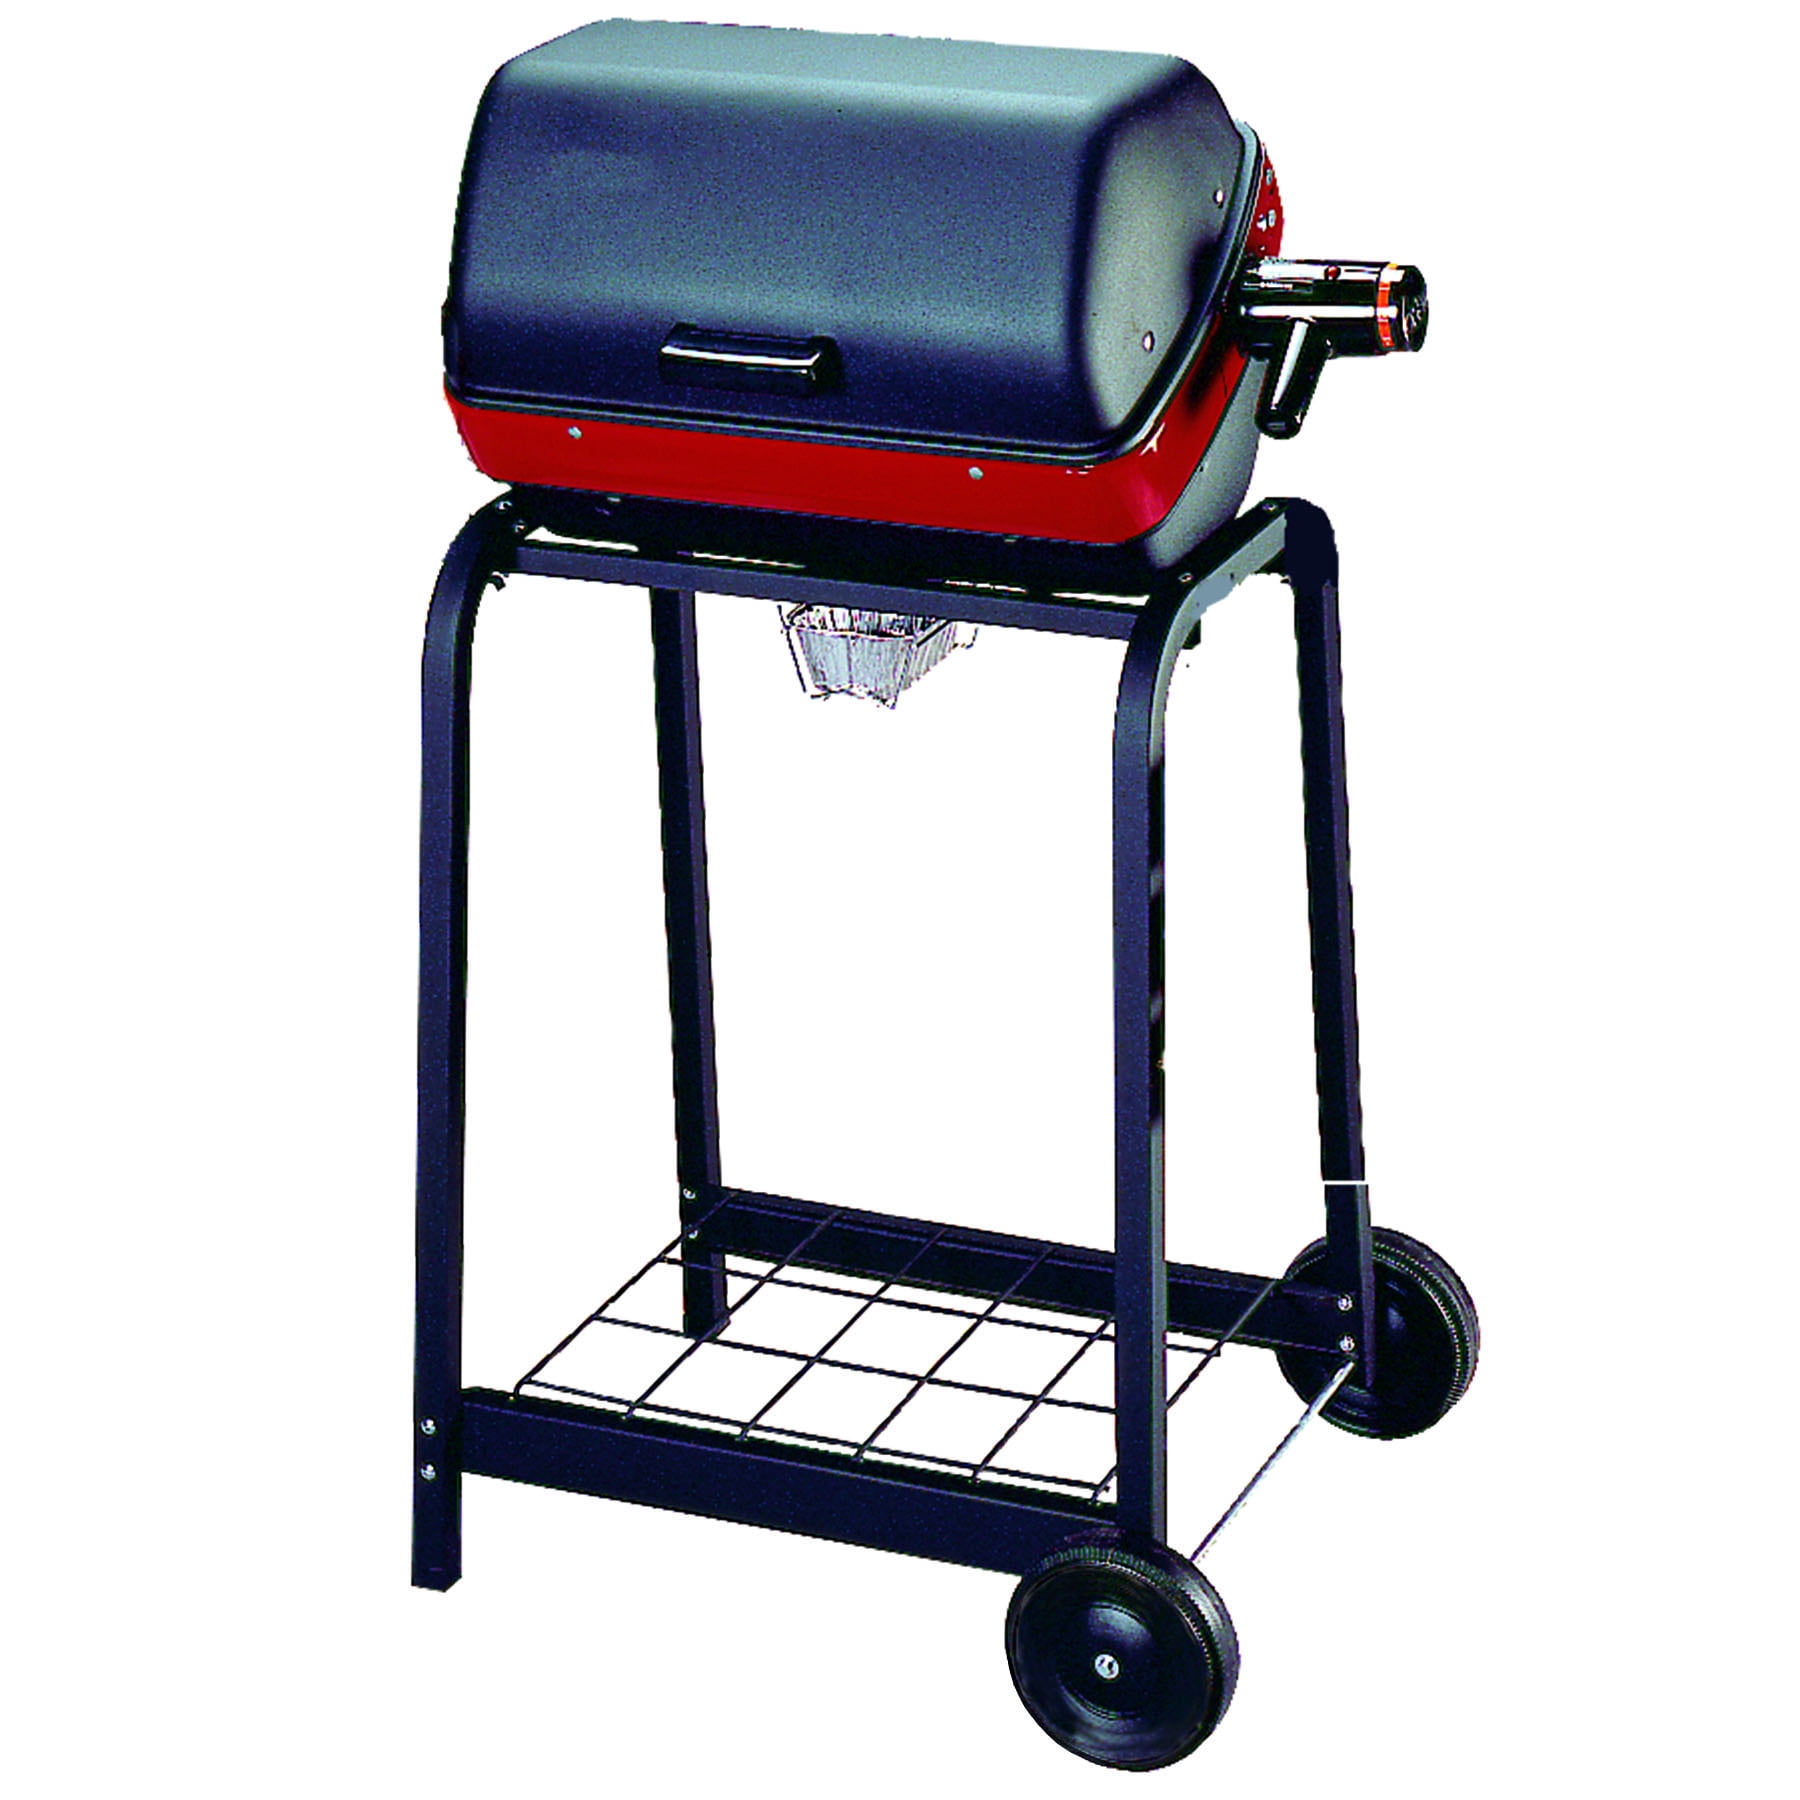 600 Watt Strong and A One Year Warranty Premium Electric Charcoal Starter Products Perfect for Big Green Egg Kamado Joe & Weber Kettle Grills Adjustable Height Great for Lump Charcoal 